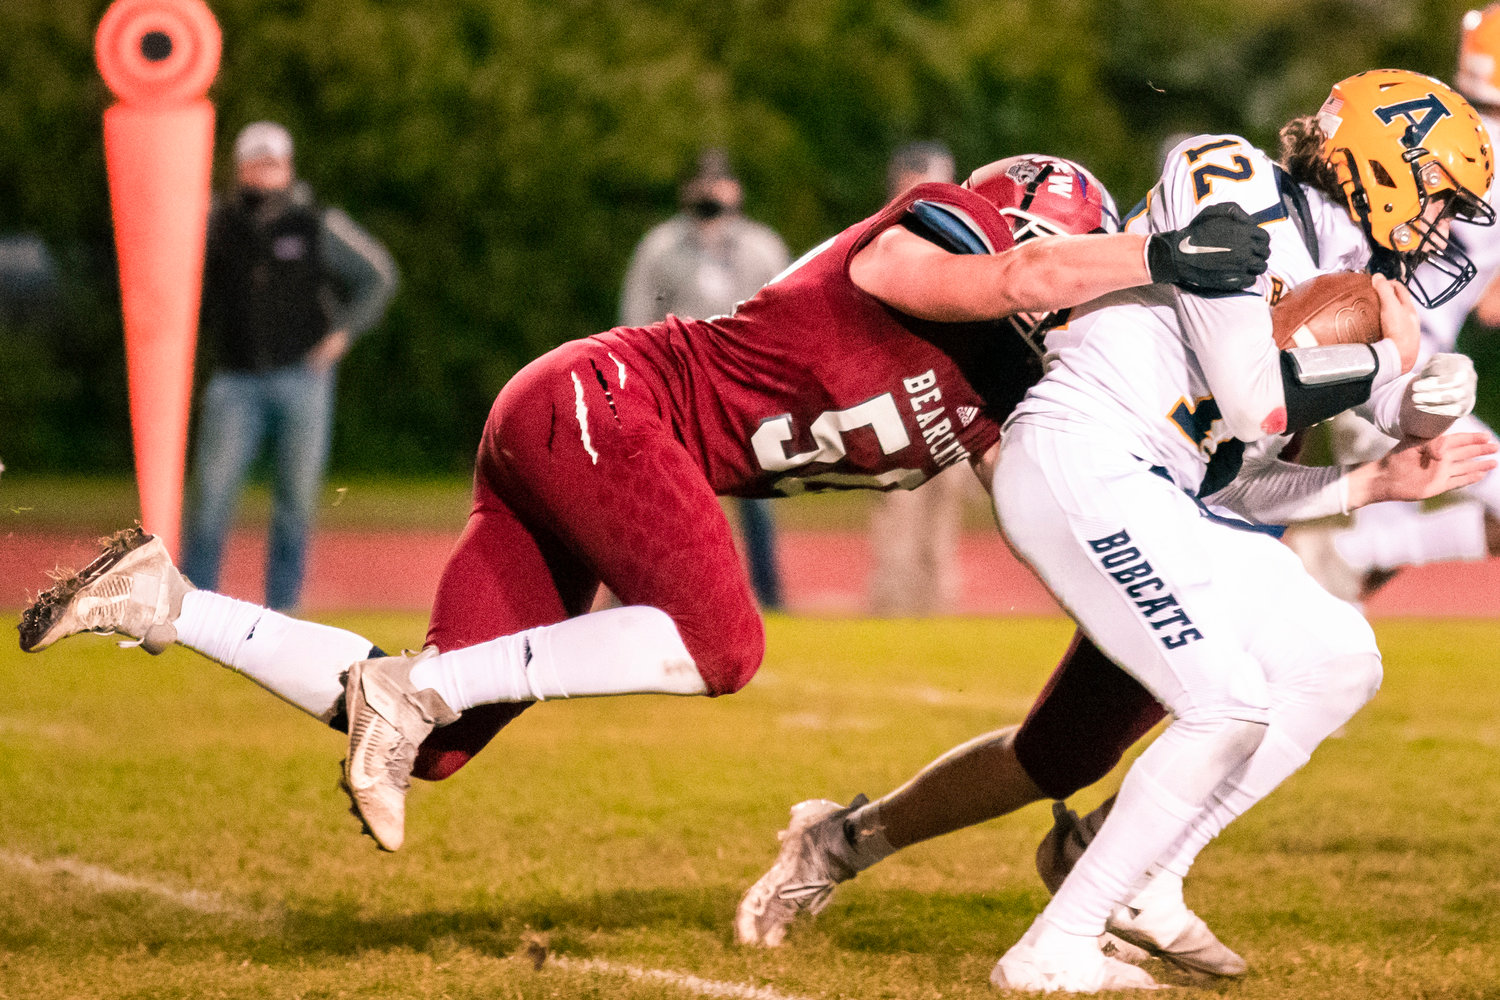 Aberdeen’s Jakob Bowers (12)is brought down by W.F. West’s William Buzzard (50) Friday night during a game against W.F. West.